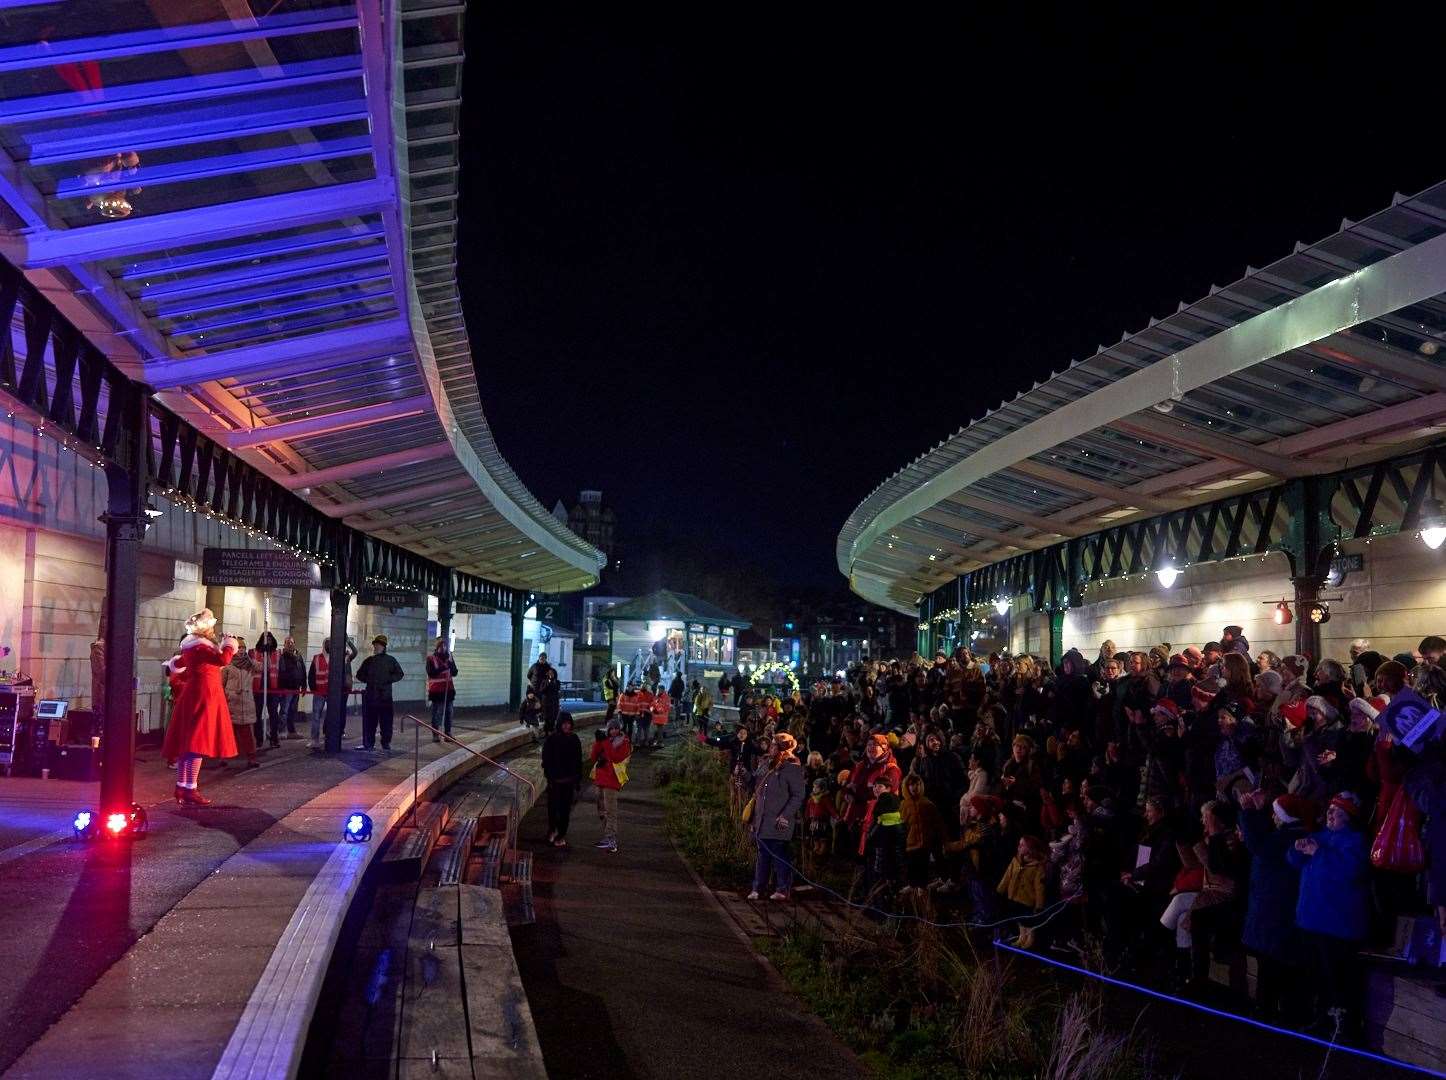 The former station in Folkestone, which now hosts events, has been awarded the best overall entry at the 2023 National Railway Heritage Awards. Picture: FHSDC